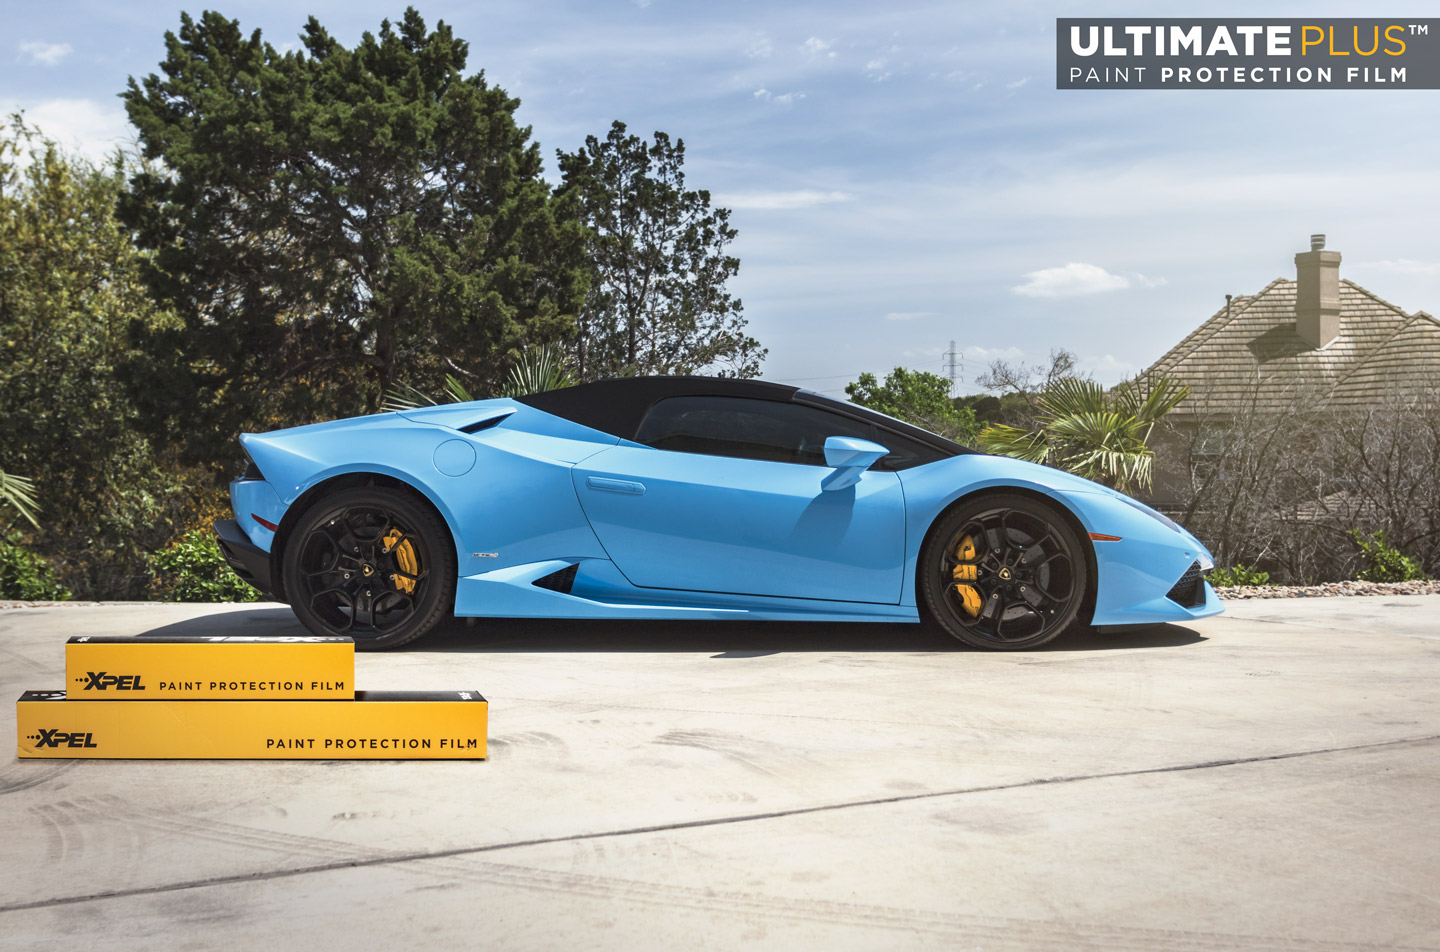 Name:  New-XPEL-ULTIMATE-PLUS-Paint-Protection-Film-Now-Available-Blue-Lamborghini-Huracan-Spyder-side-.jpg
Views: 1799
Size:  337.1 KB